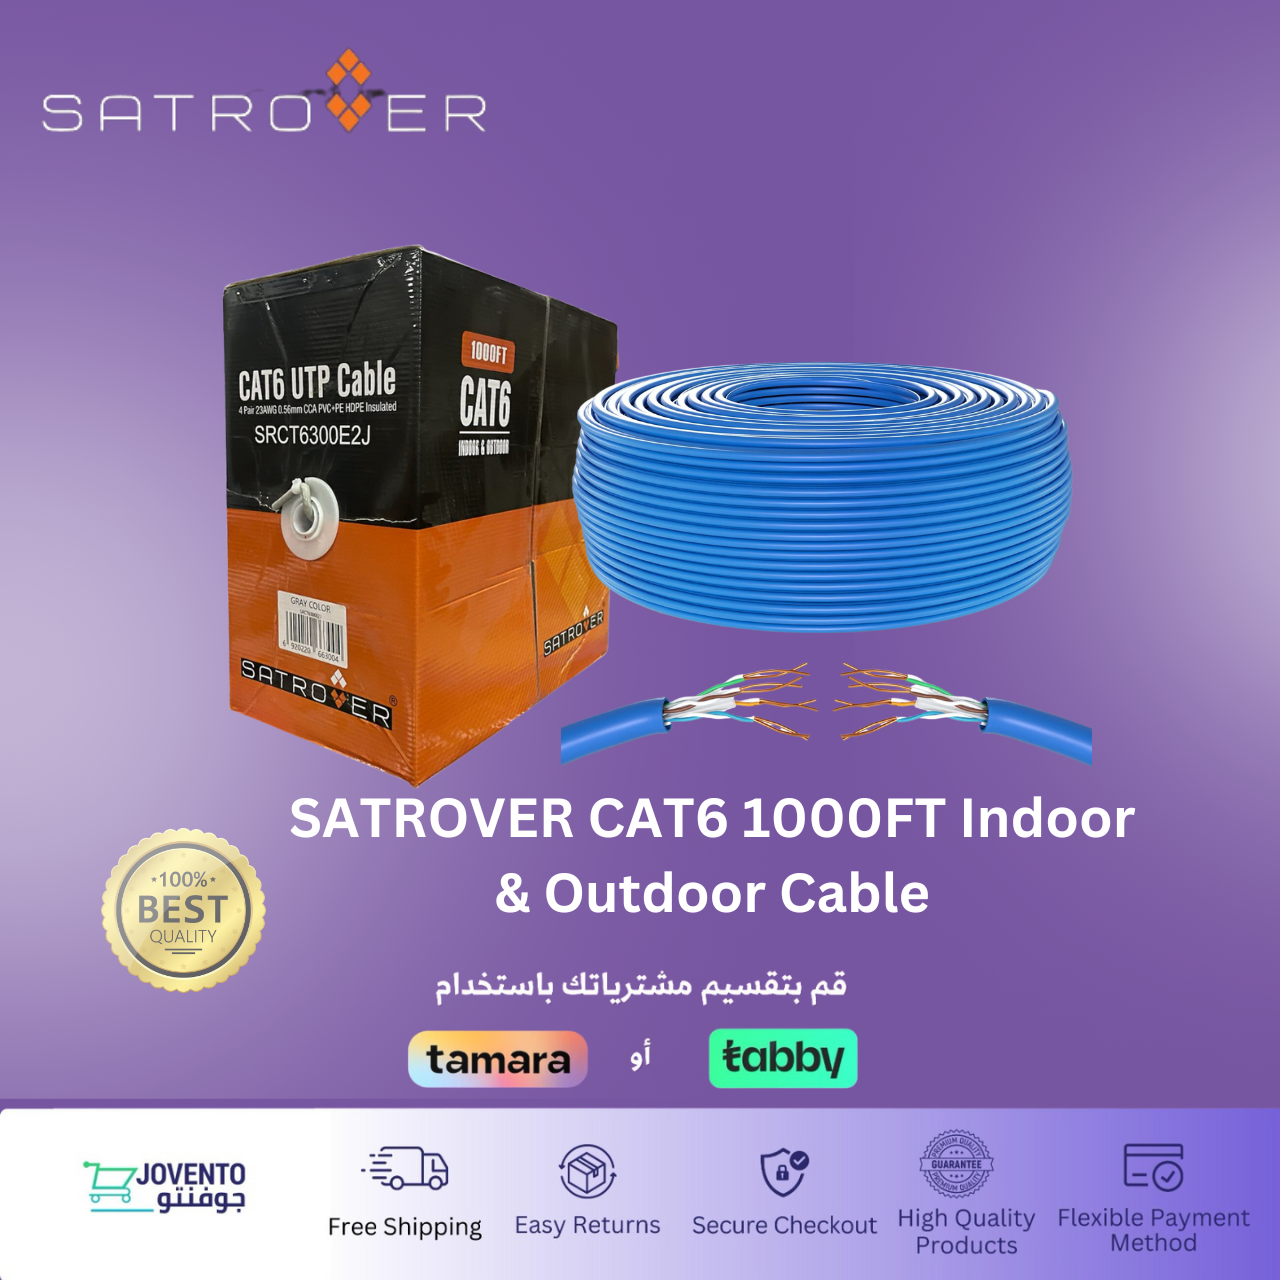 SATROVER CAT6 1000FT Indoor & Outdoor Cable